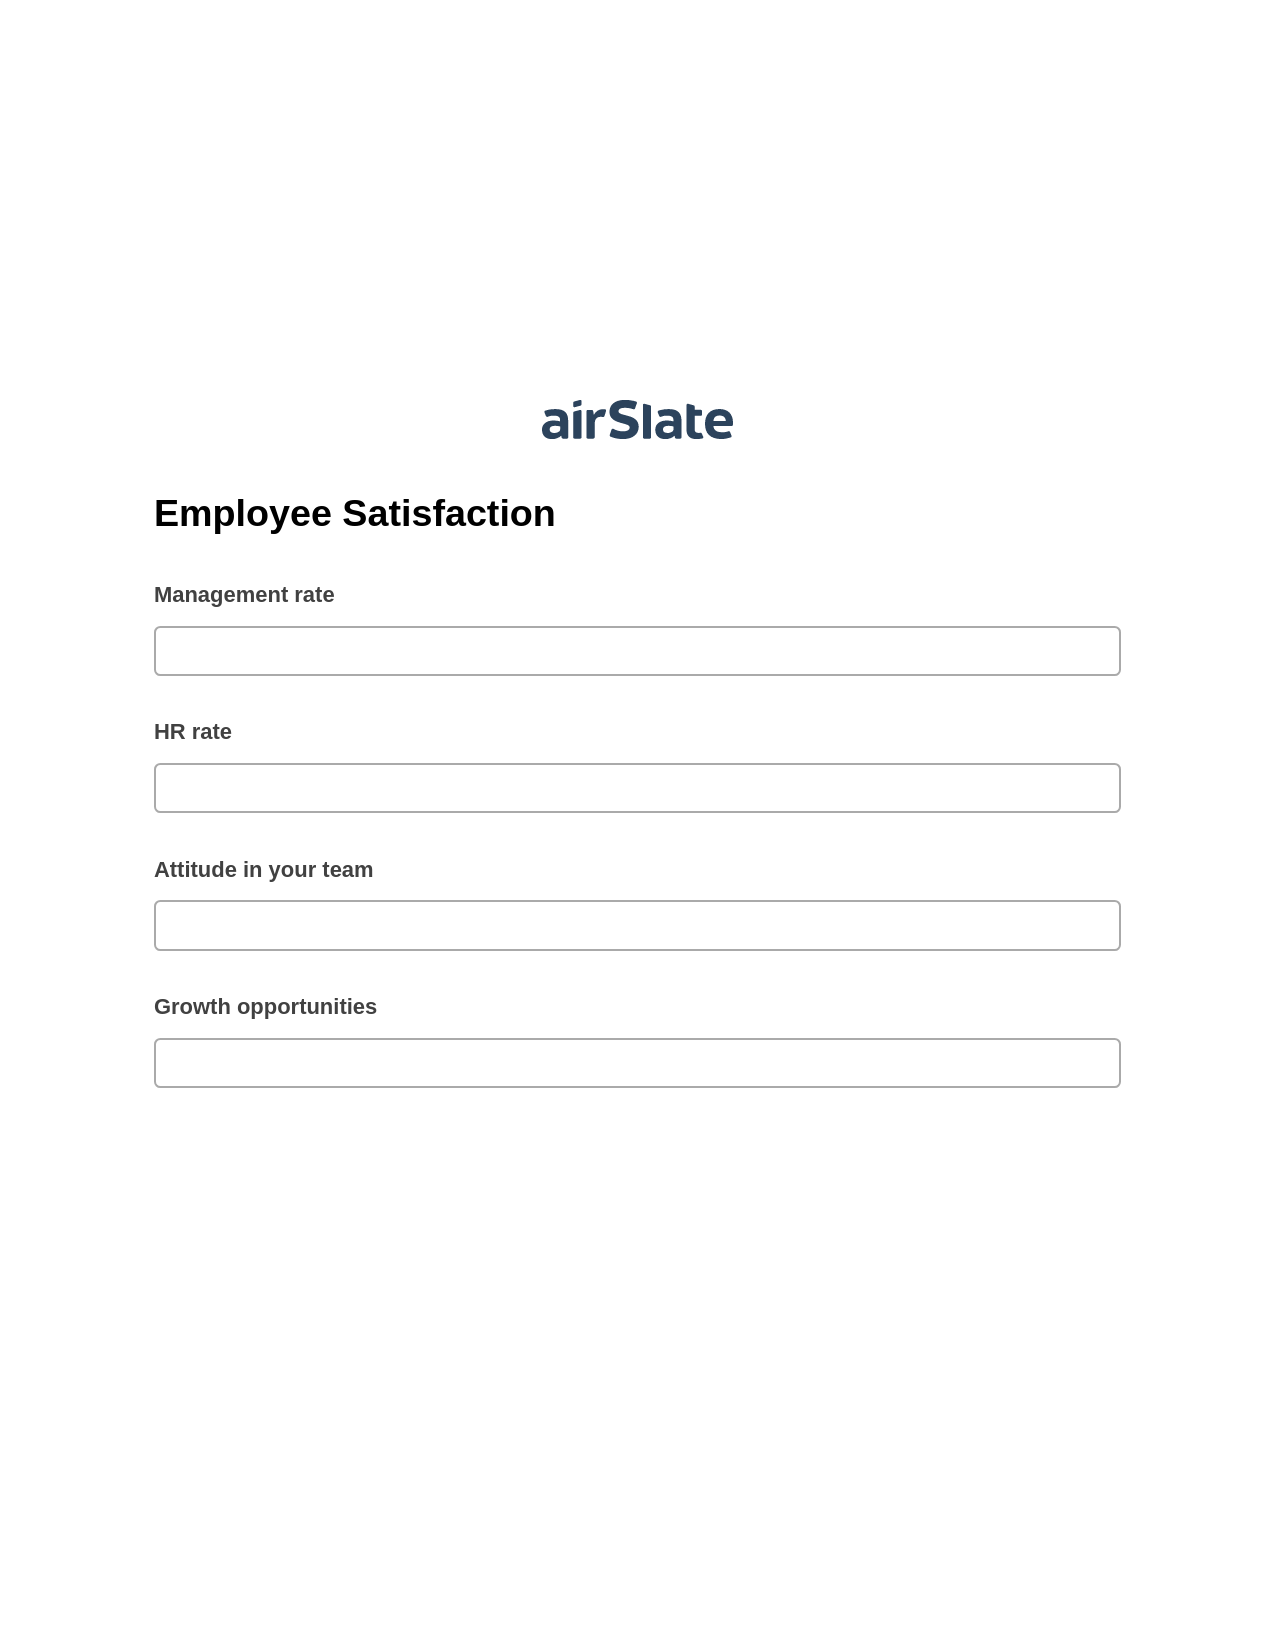 Employee Satisfaction Pre-fill from Excel Spreadsheet Bot, Hide Signatures Bot, Export to MySQL Bot